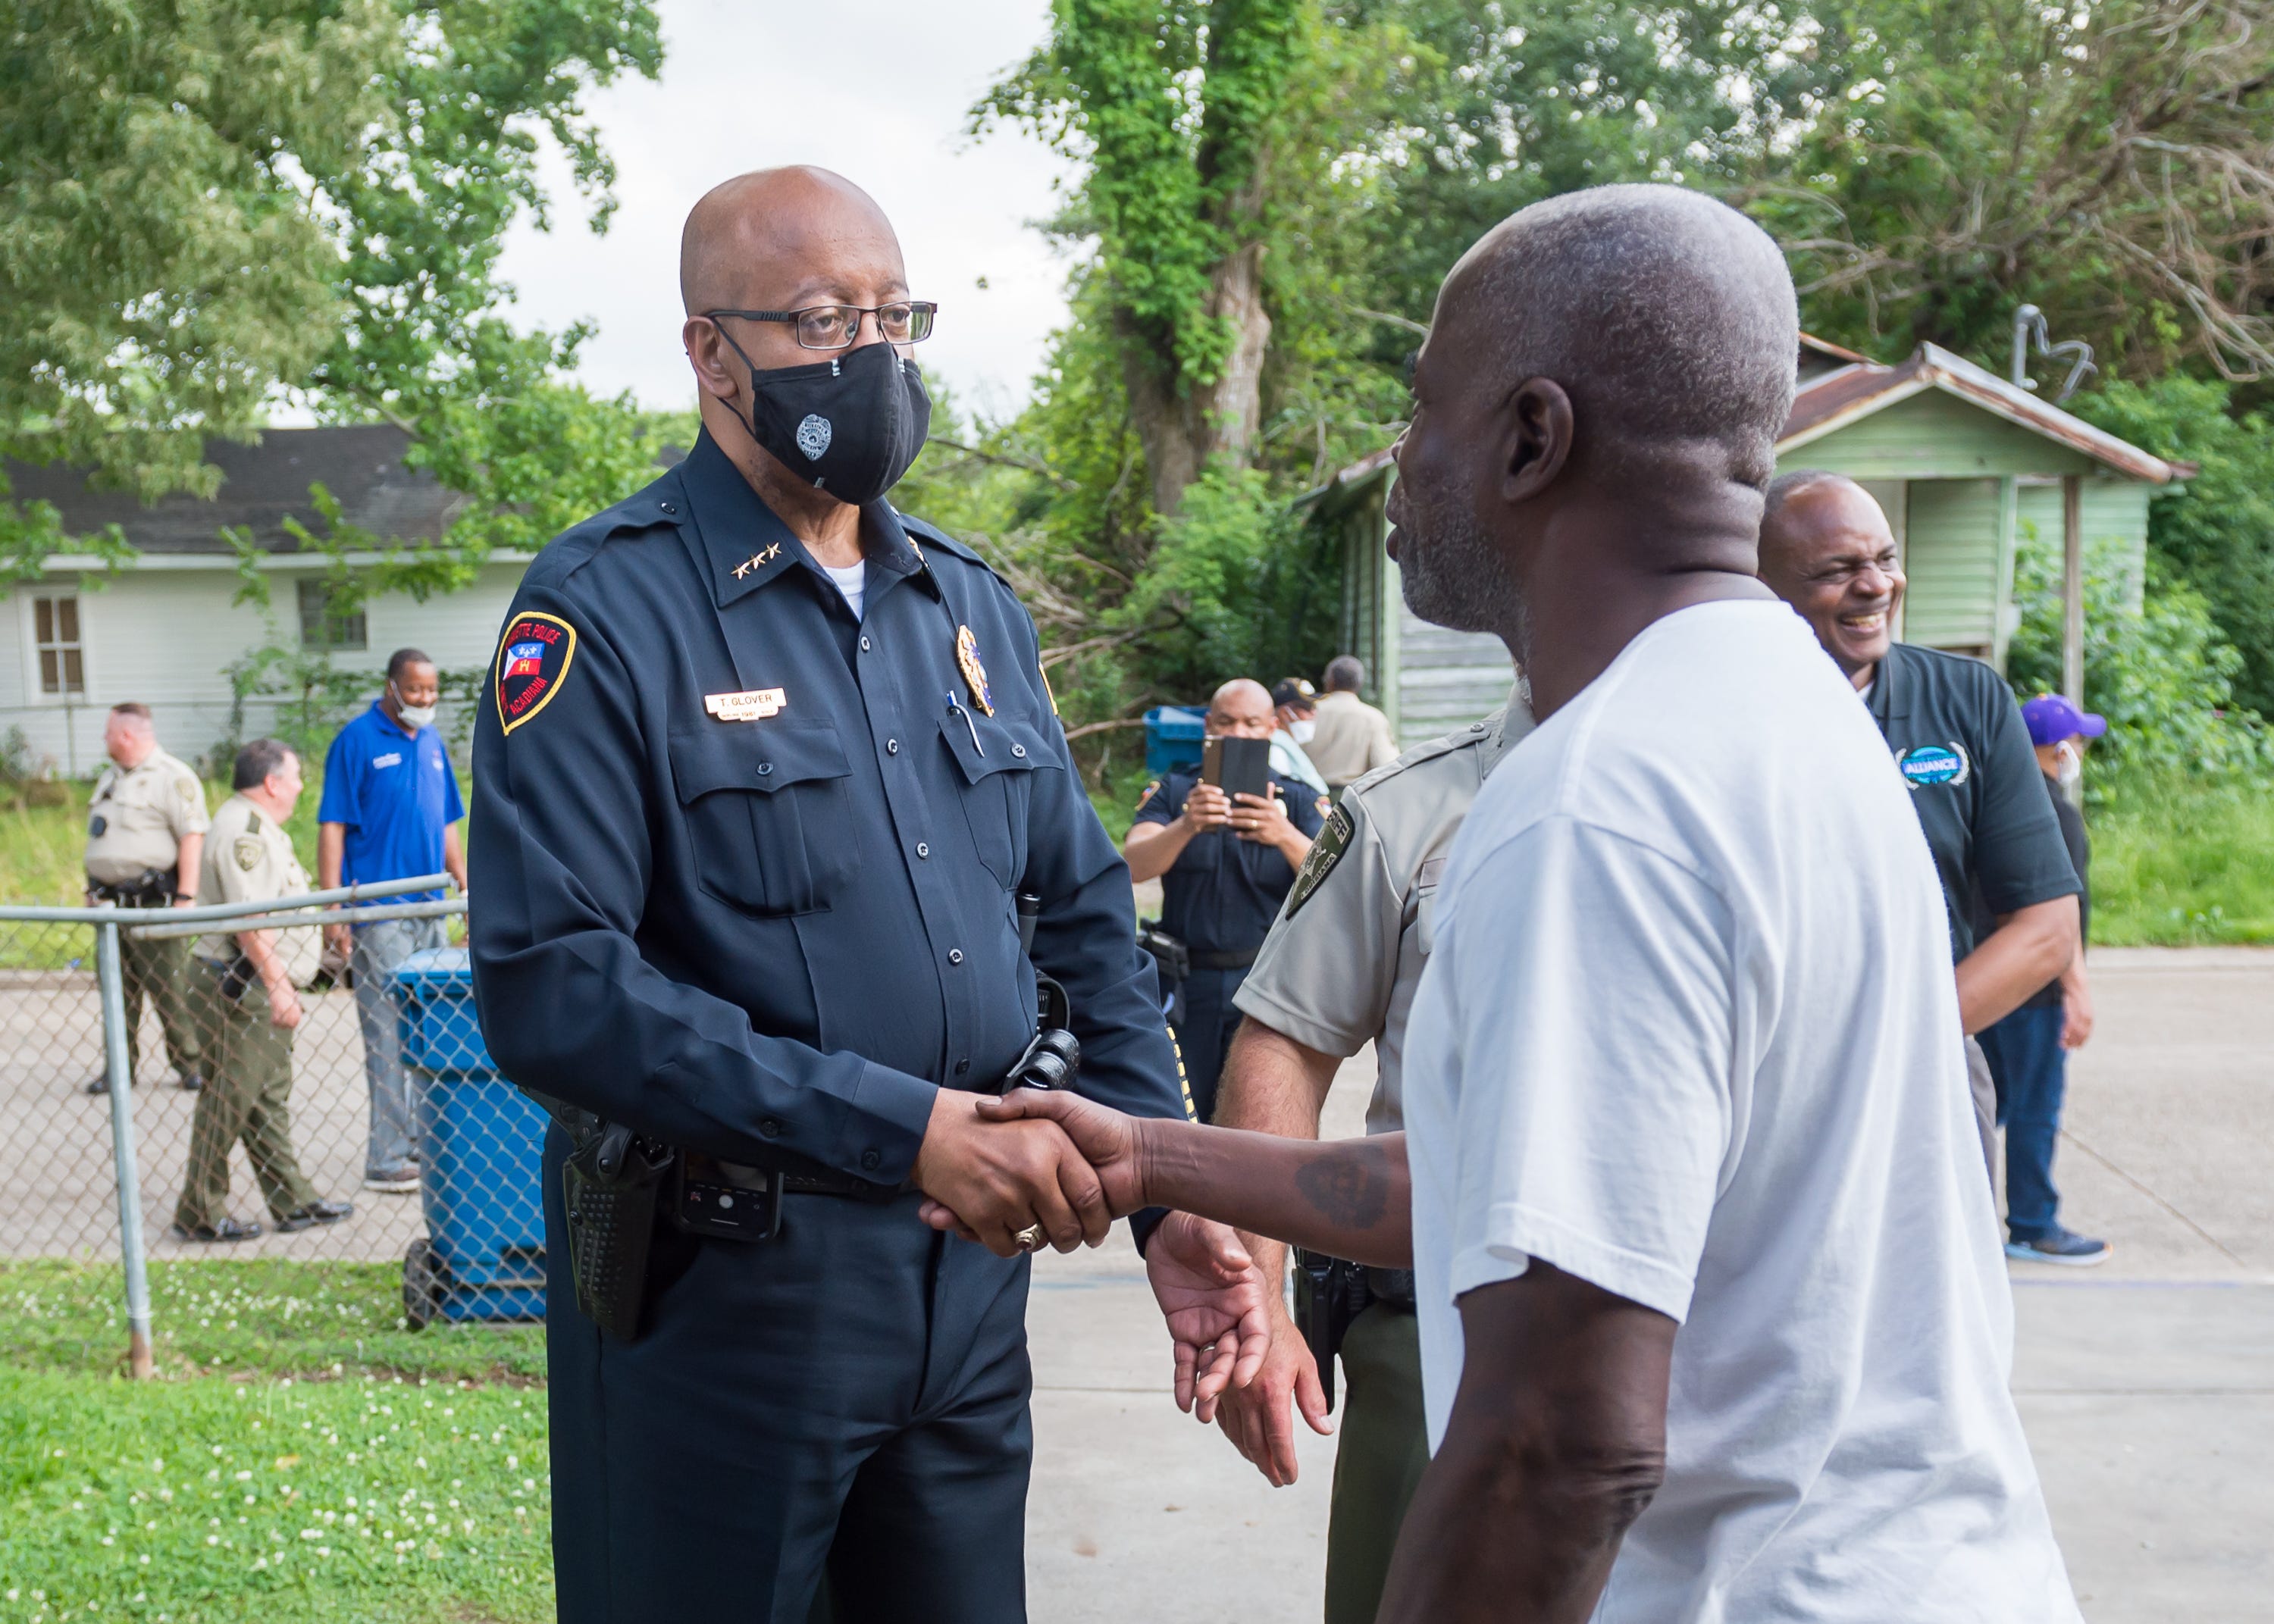 Law Enforcement Officers with the Lafayette Police Department, Lafayette Parish Sheriff's Office and the Lafayette City Marshal's Office walk in a neighborhood to visit with residents, listen to any concerns and introduce themselves as part of an ongoing effort to bridge the gap between law enforcement and the community, Monday, May 3, 2021.